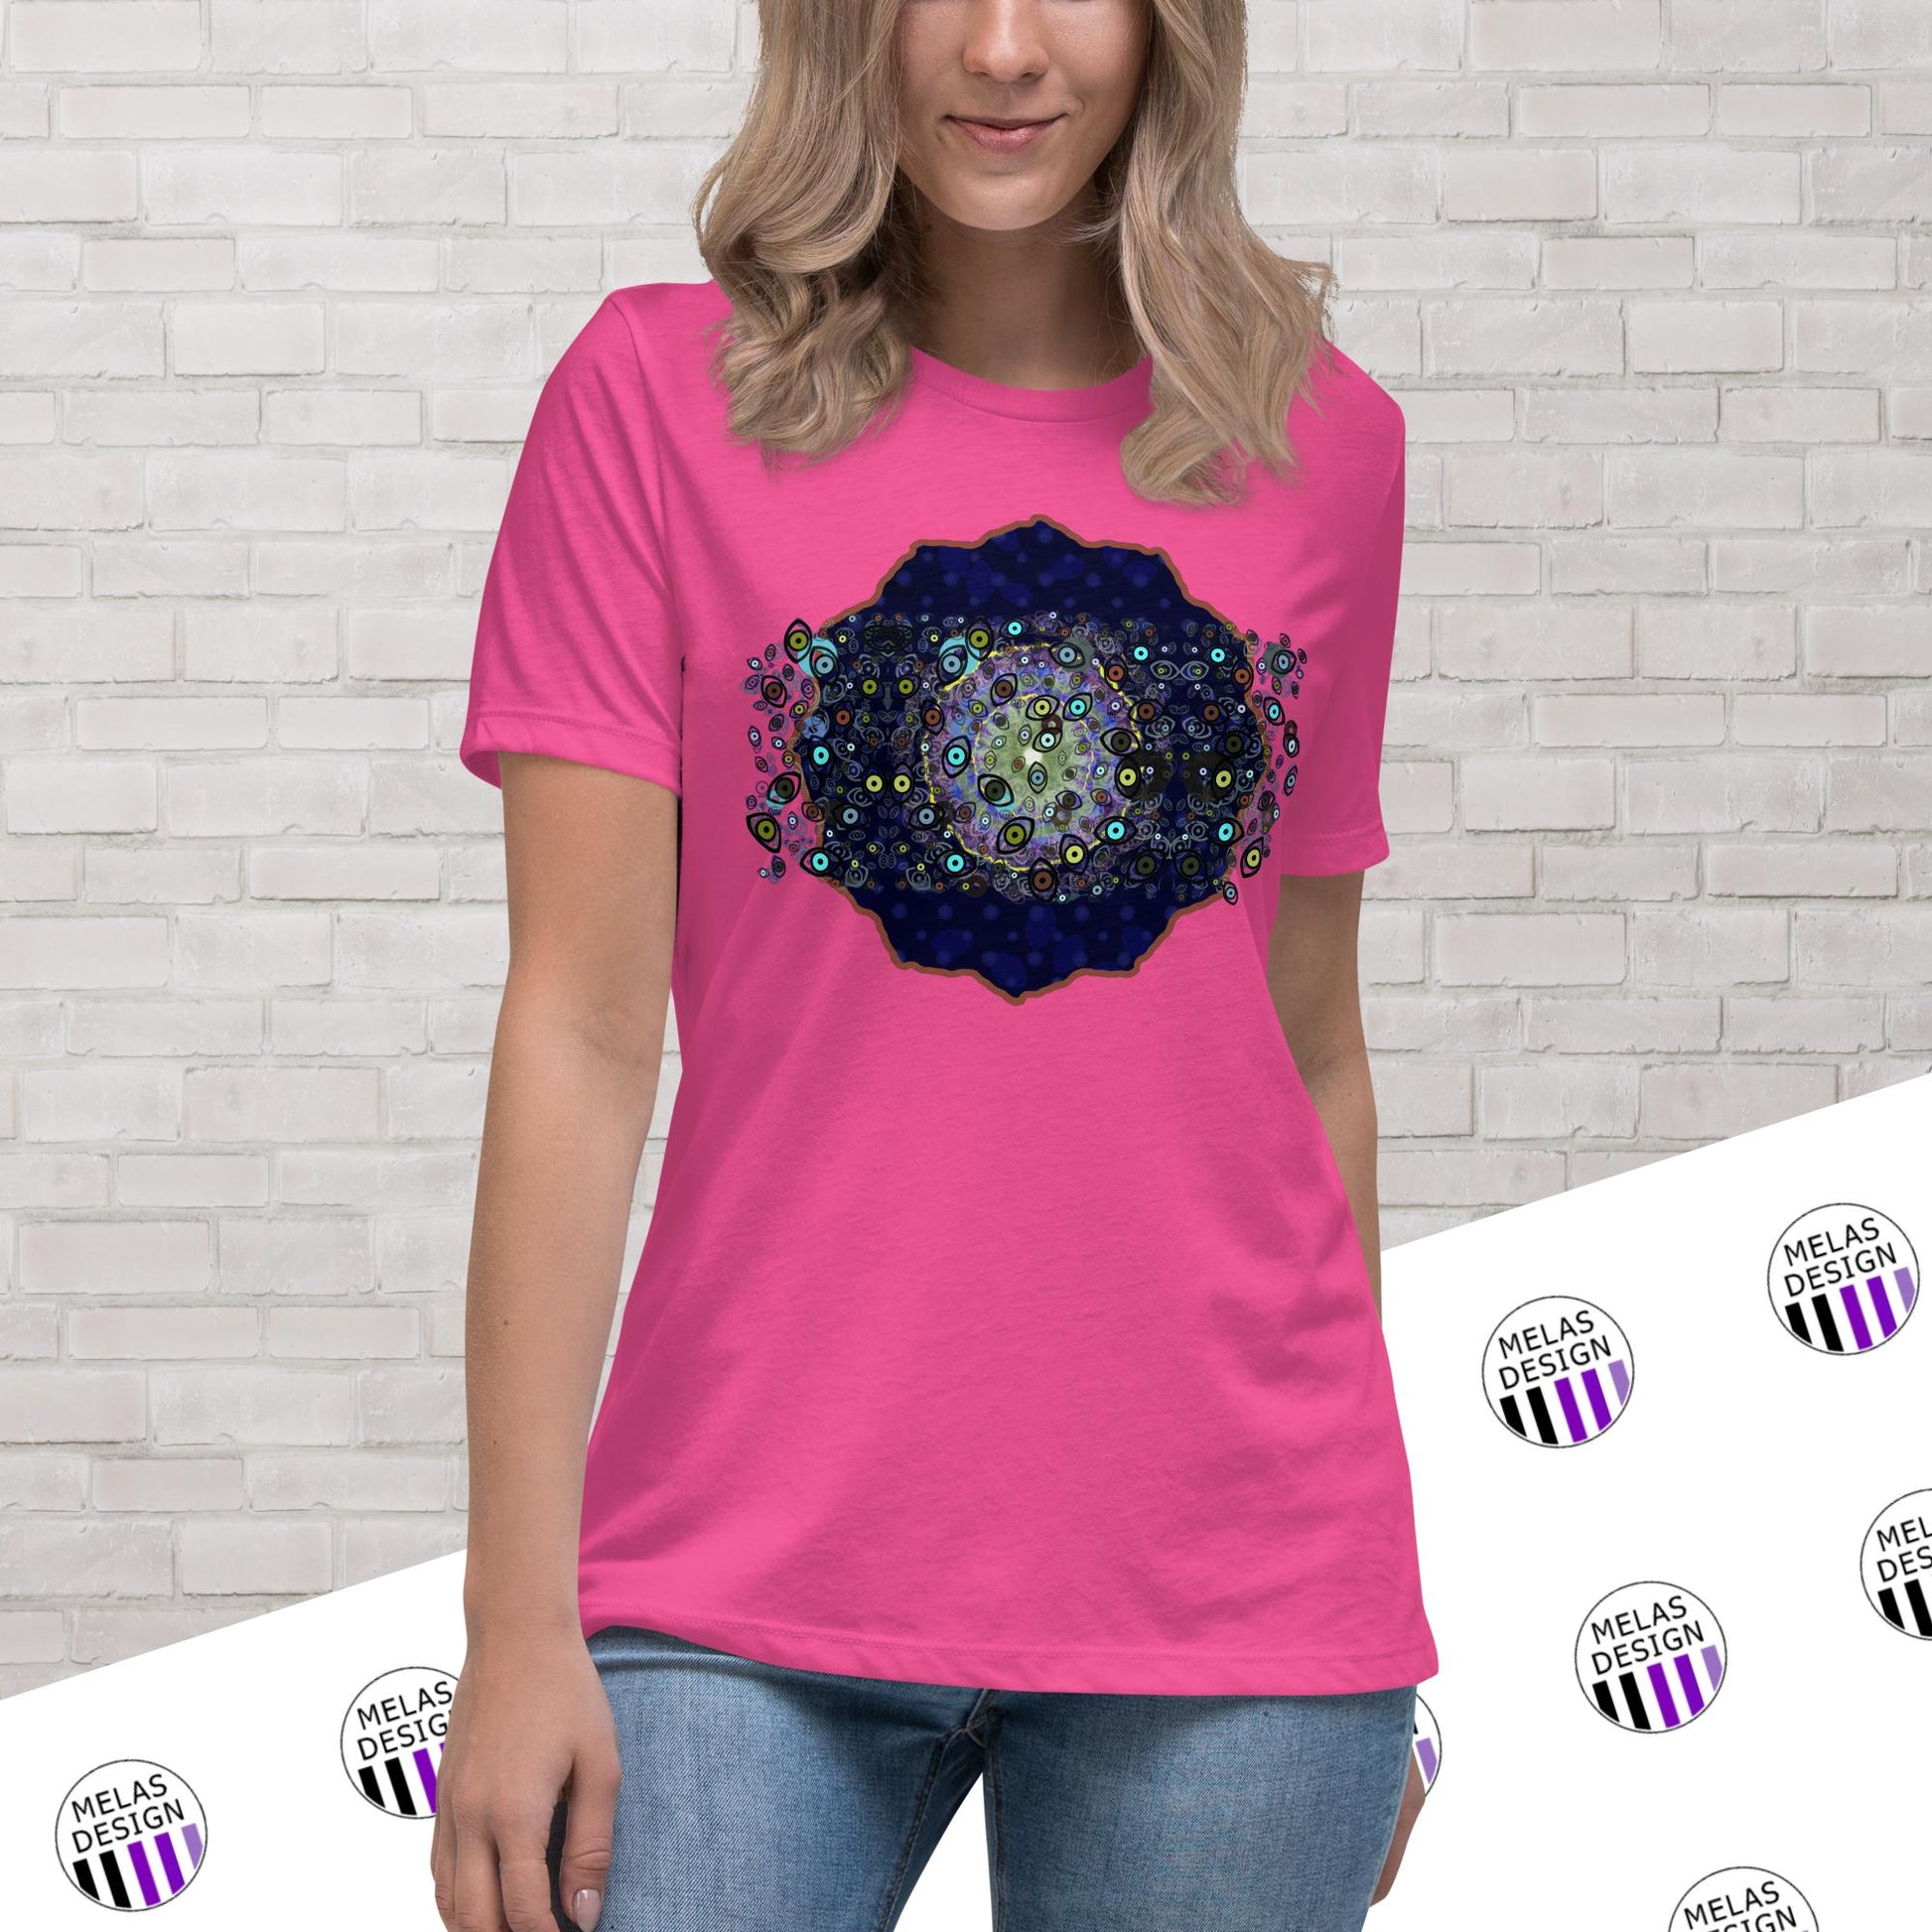 Third Eye Plus Some Women's Relaxed T-Shirt; Melasdesign; Witchy Gothic Clothes and Cryptid Fashion Collection; trippy; eyes; digital; artist Susan Hicks; alternative fashion; S-3X